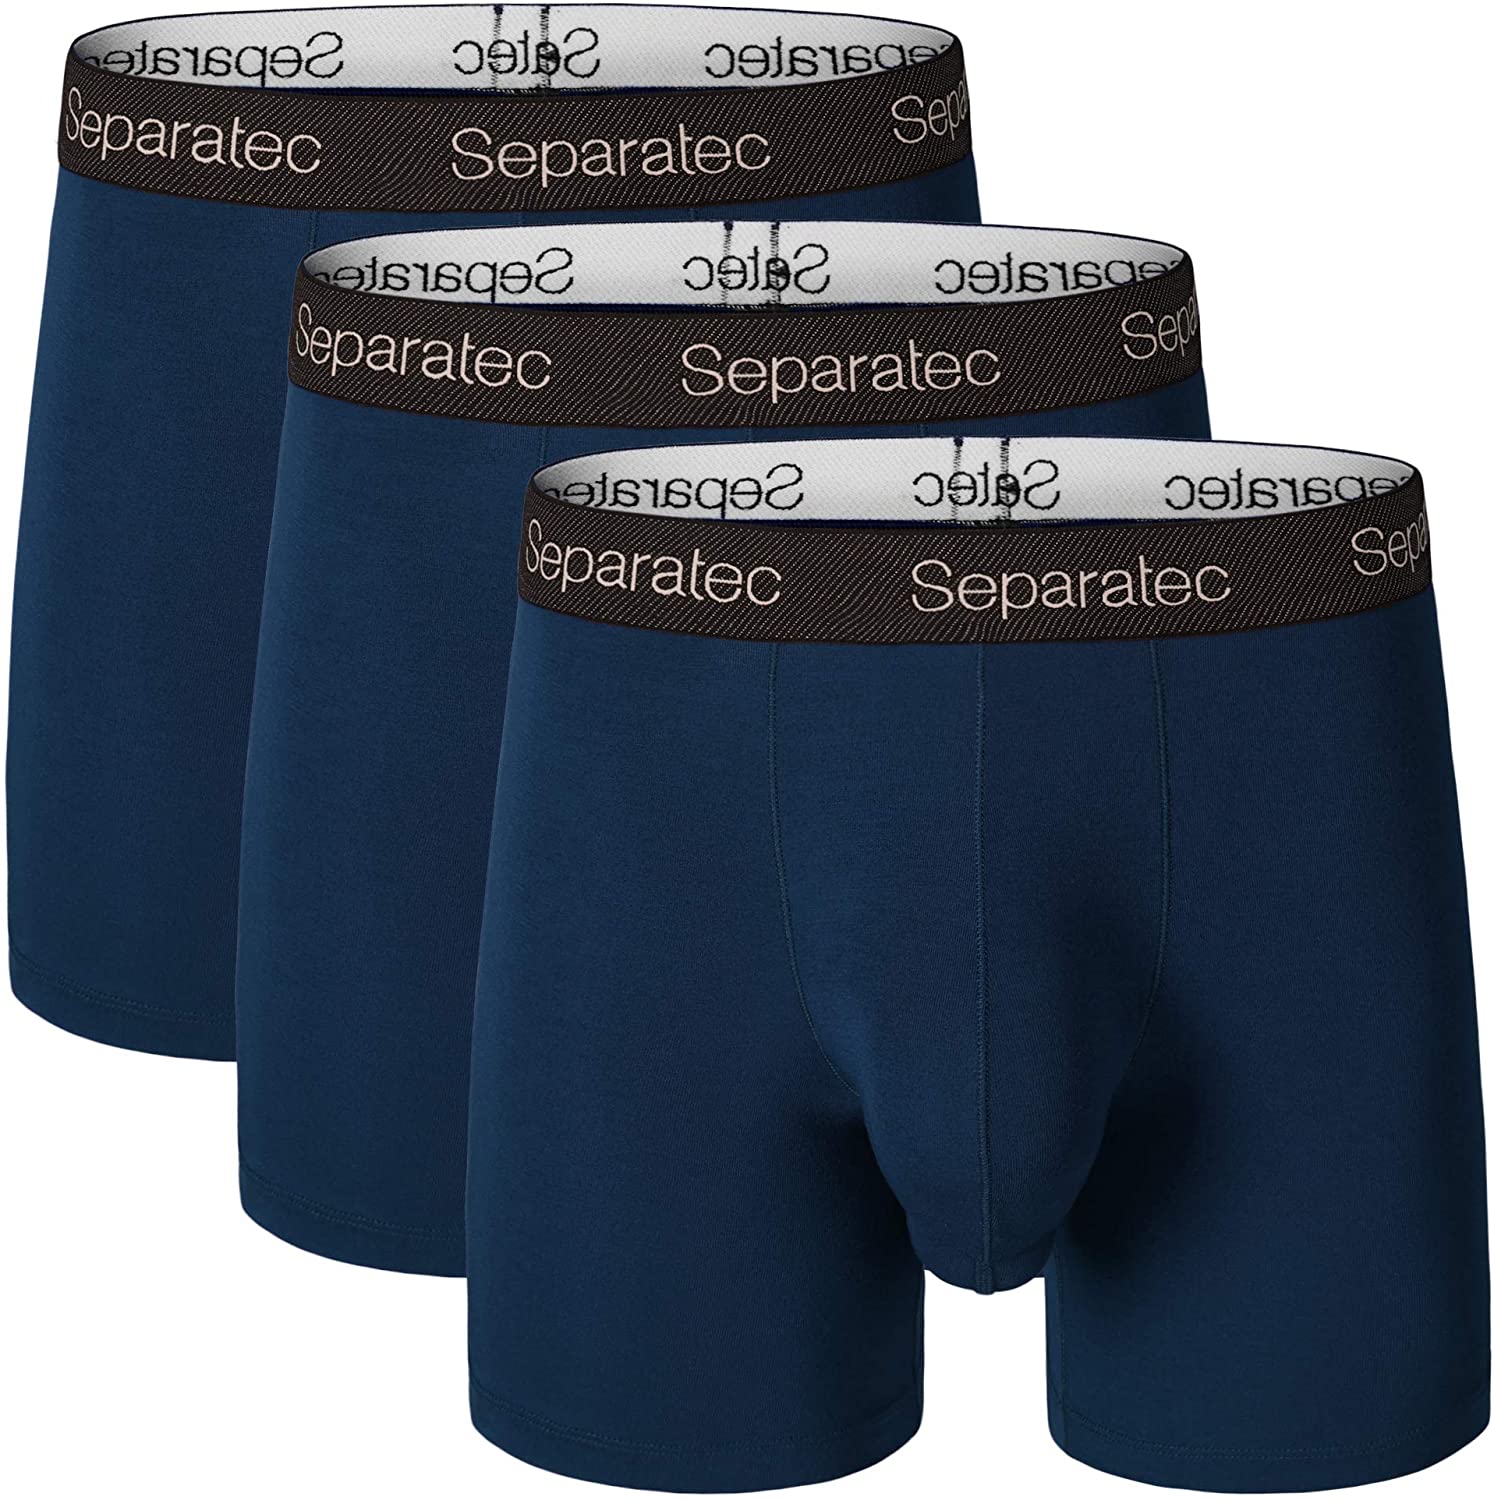 Separatec Mens 3 Pack Micro Modal Separate Pouches Comfort Fit Boxer Briefs